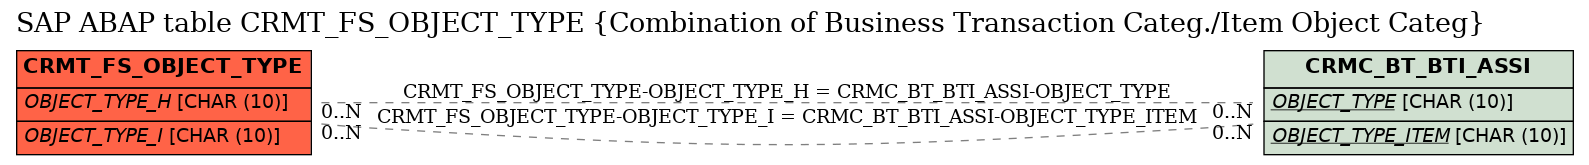 E-R Diagram for table CRMT_FS_OBJECT_TYPE (Combination of Business Transaction Categ./Item Object Categ)